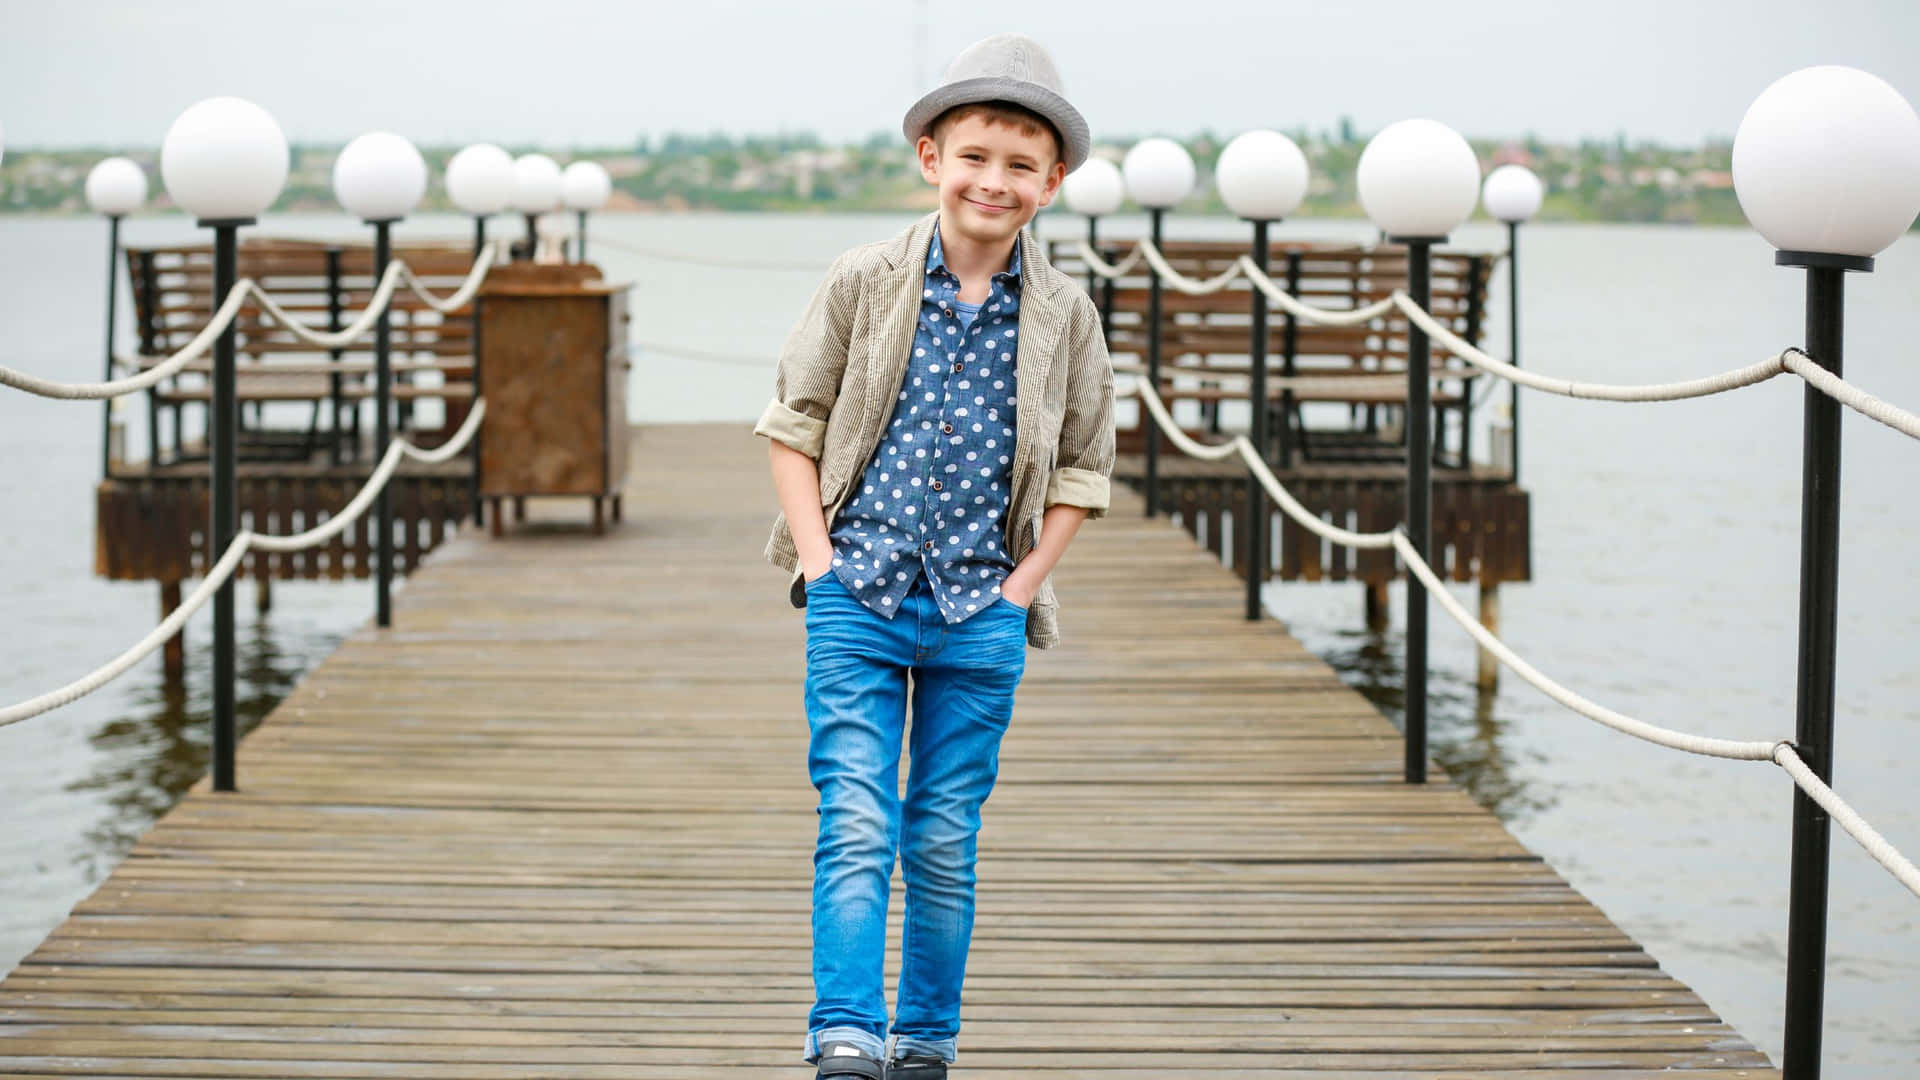 4. Stylish little boy with blonde hair and trendy outfit - wide 9